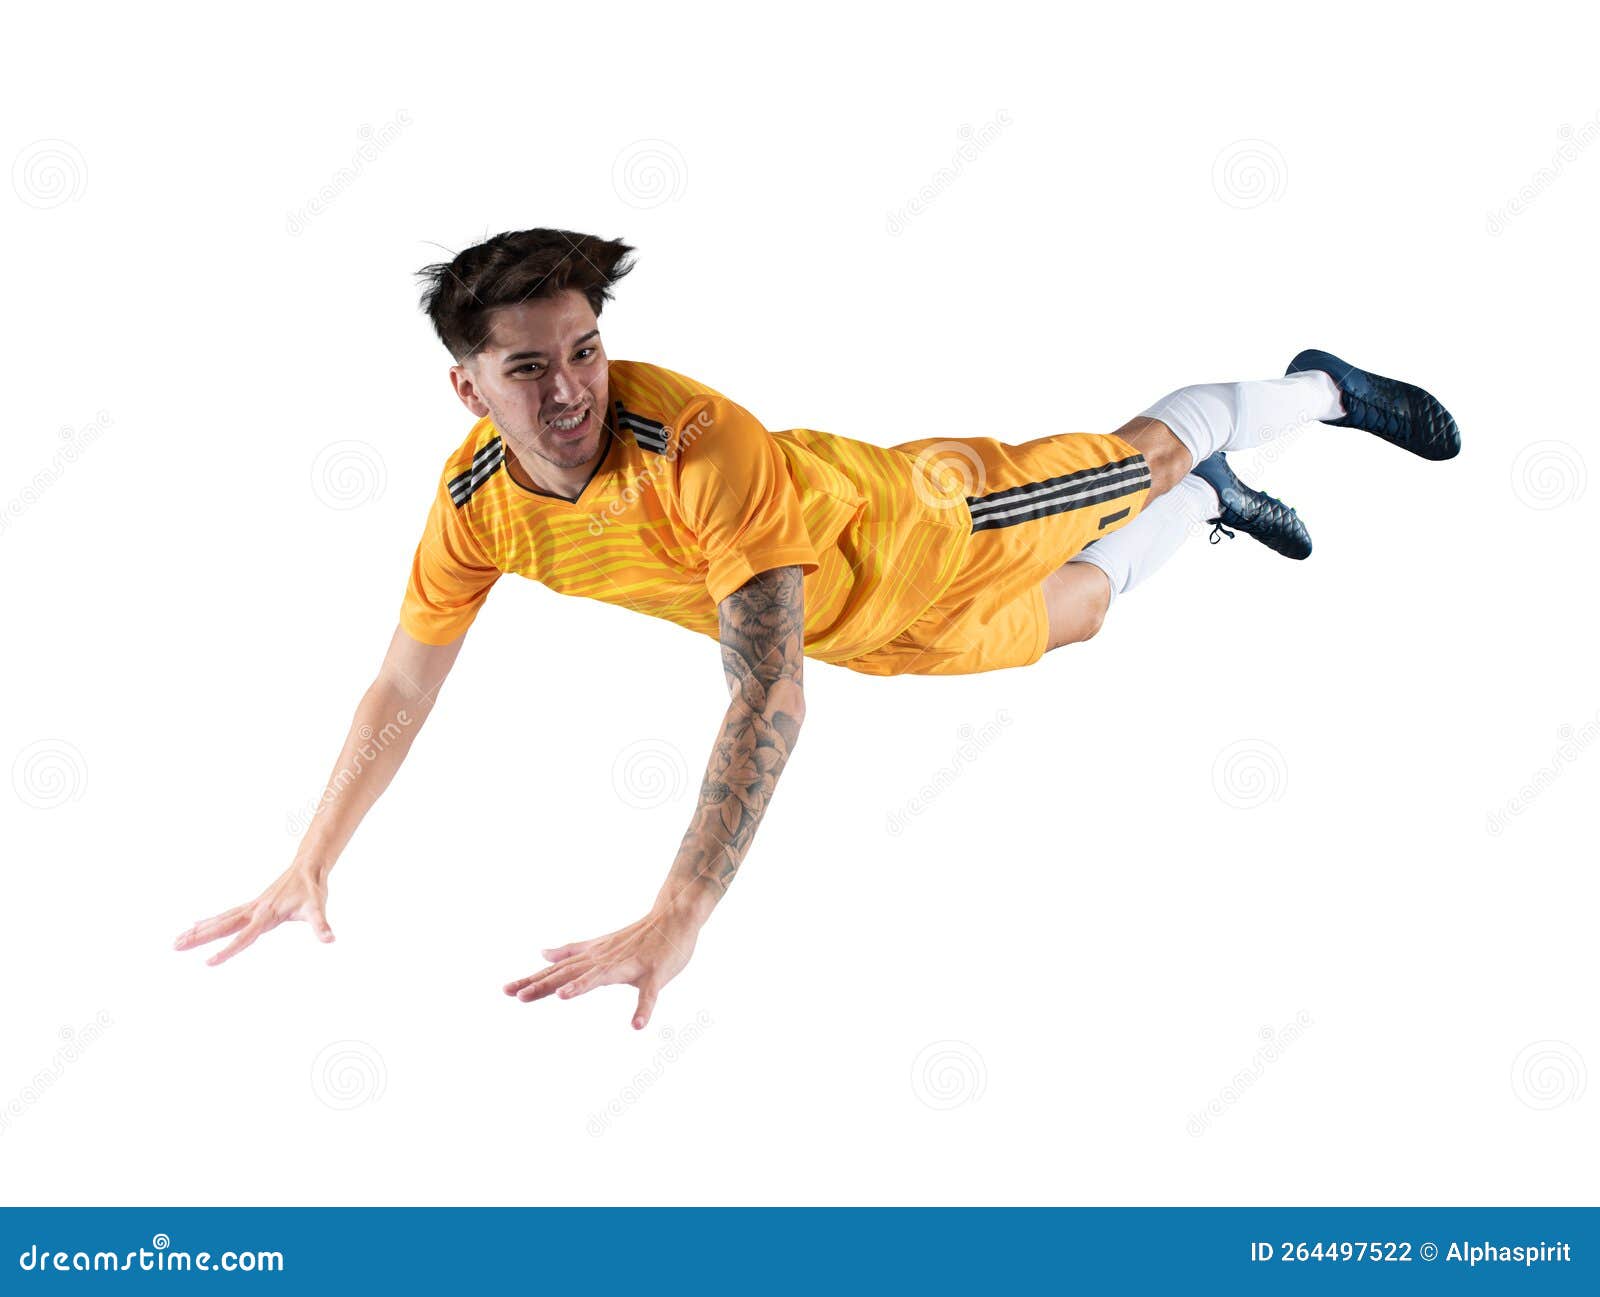 football striker player with yellow team suit jumps